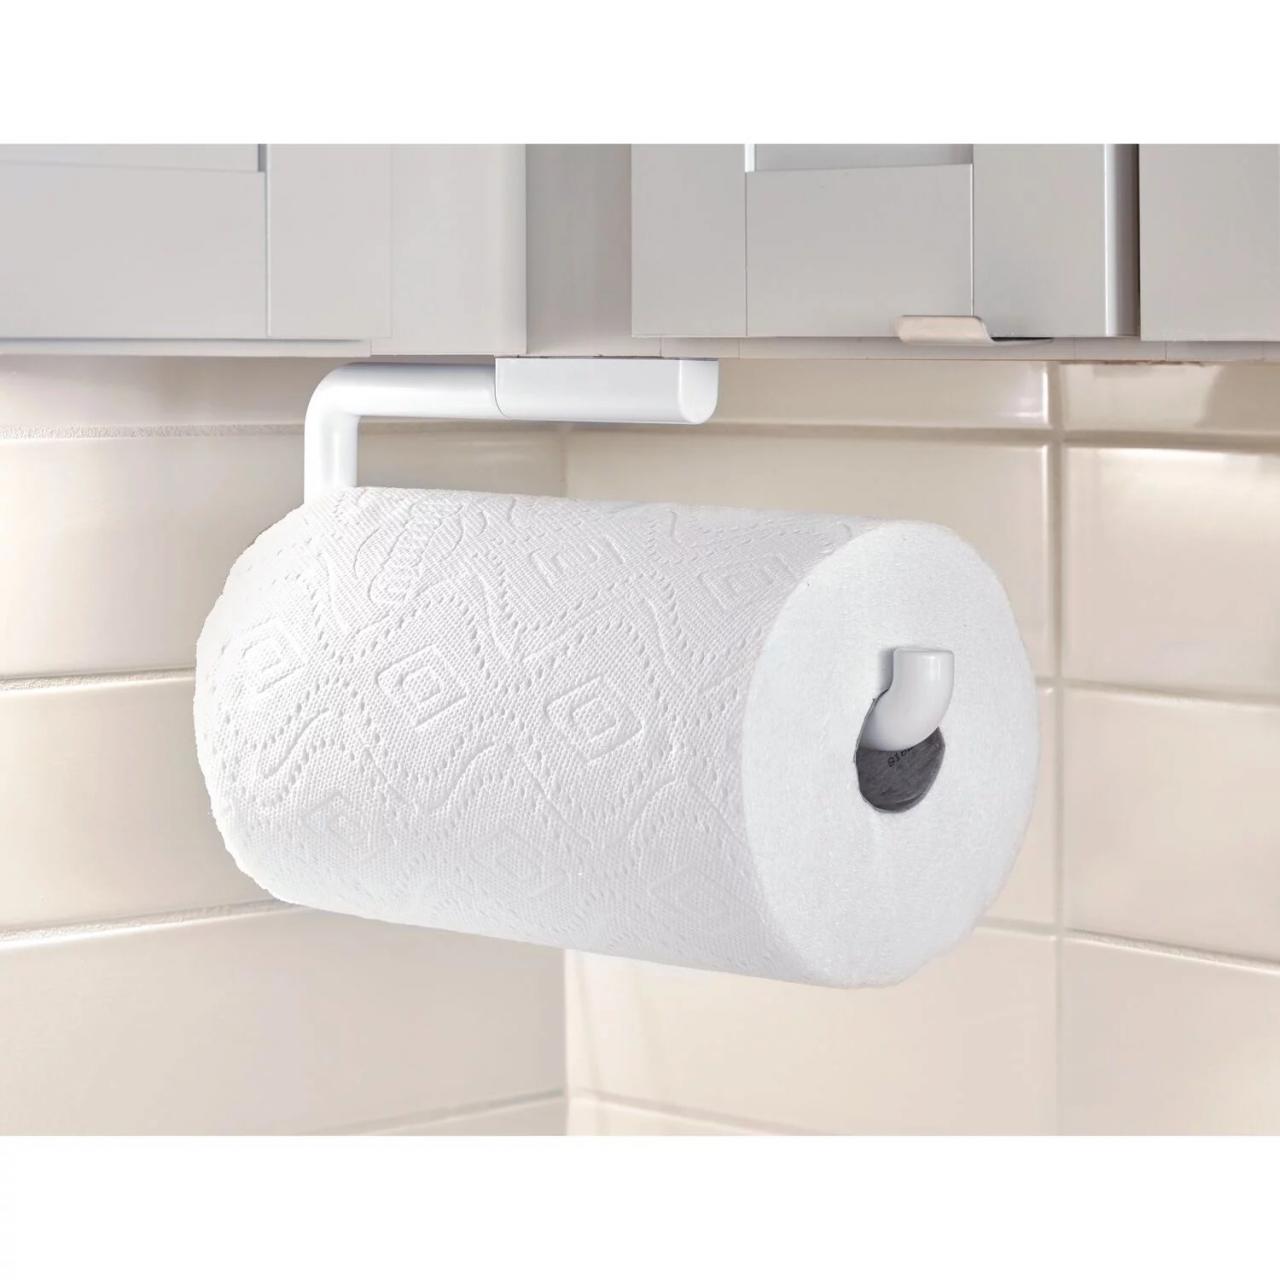 iDesign Plastic Wall Mounted Metal Paper Towel Holder, Roll Organizer